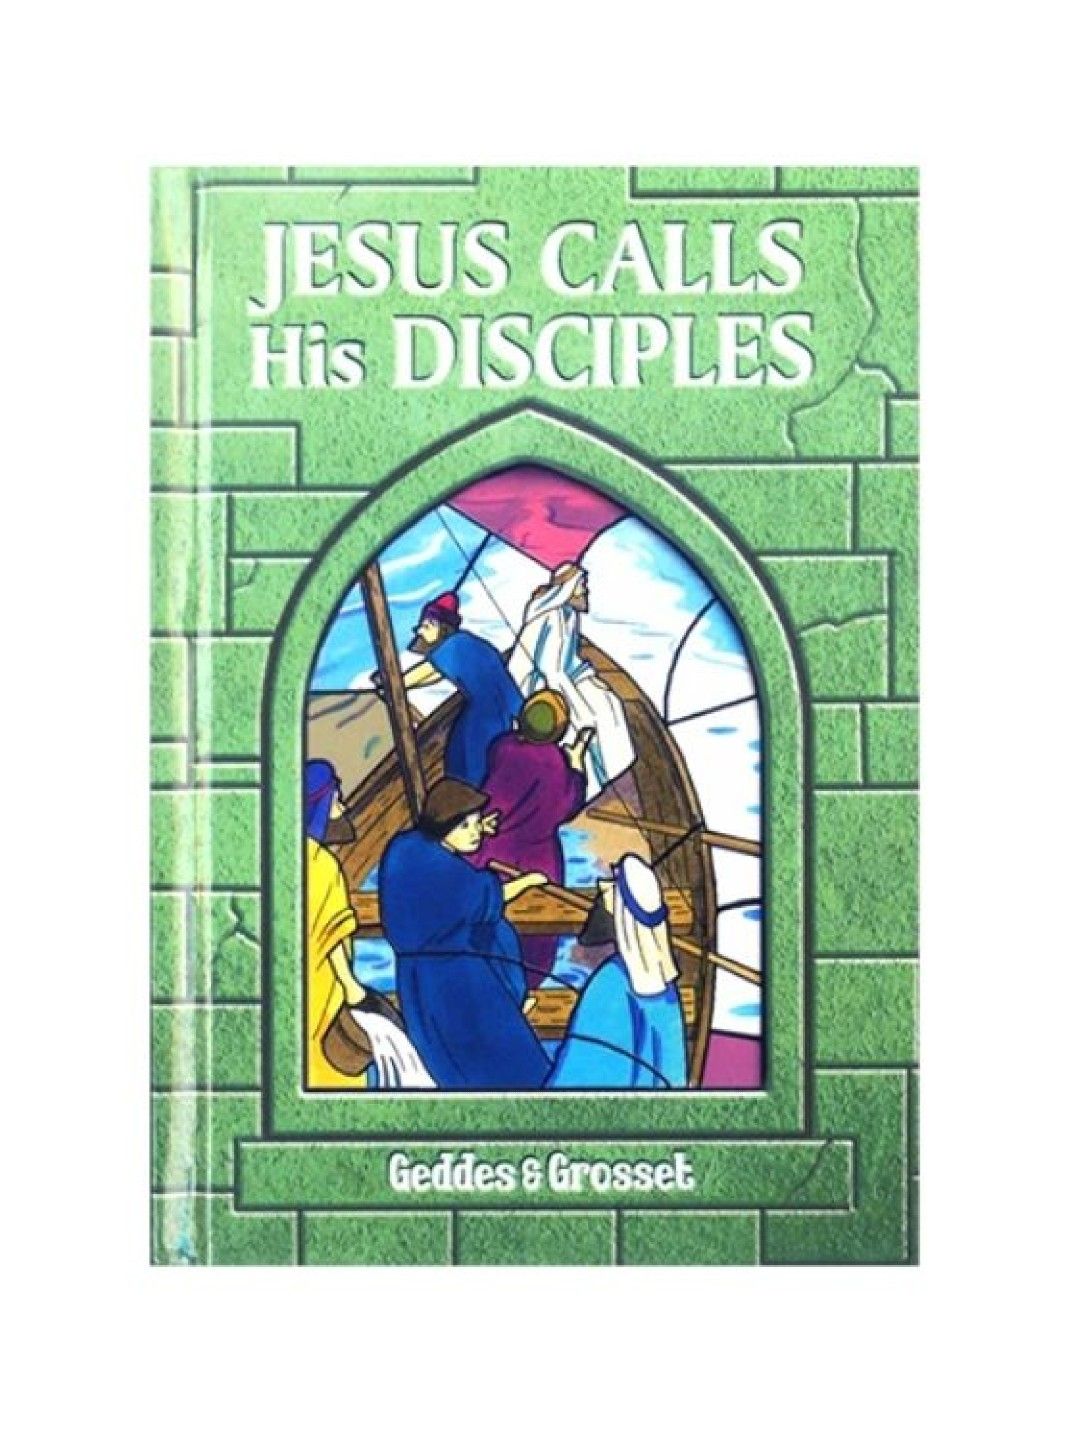 Learning is Fun Stories From The Bible - Jesus Calls His Disciples